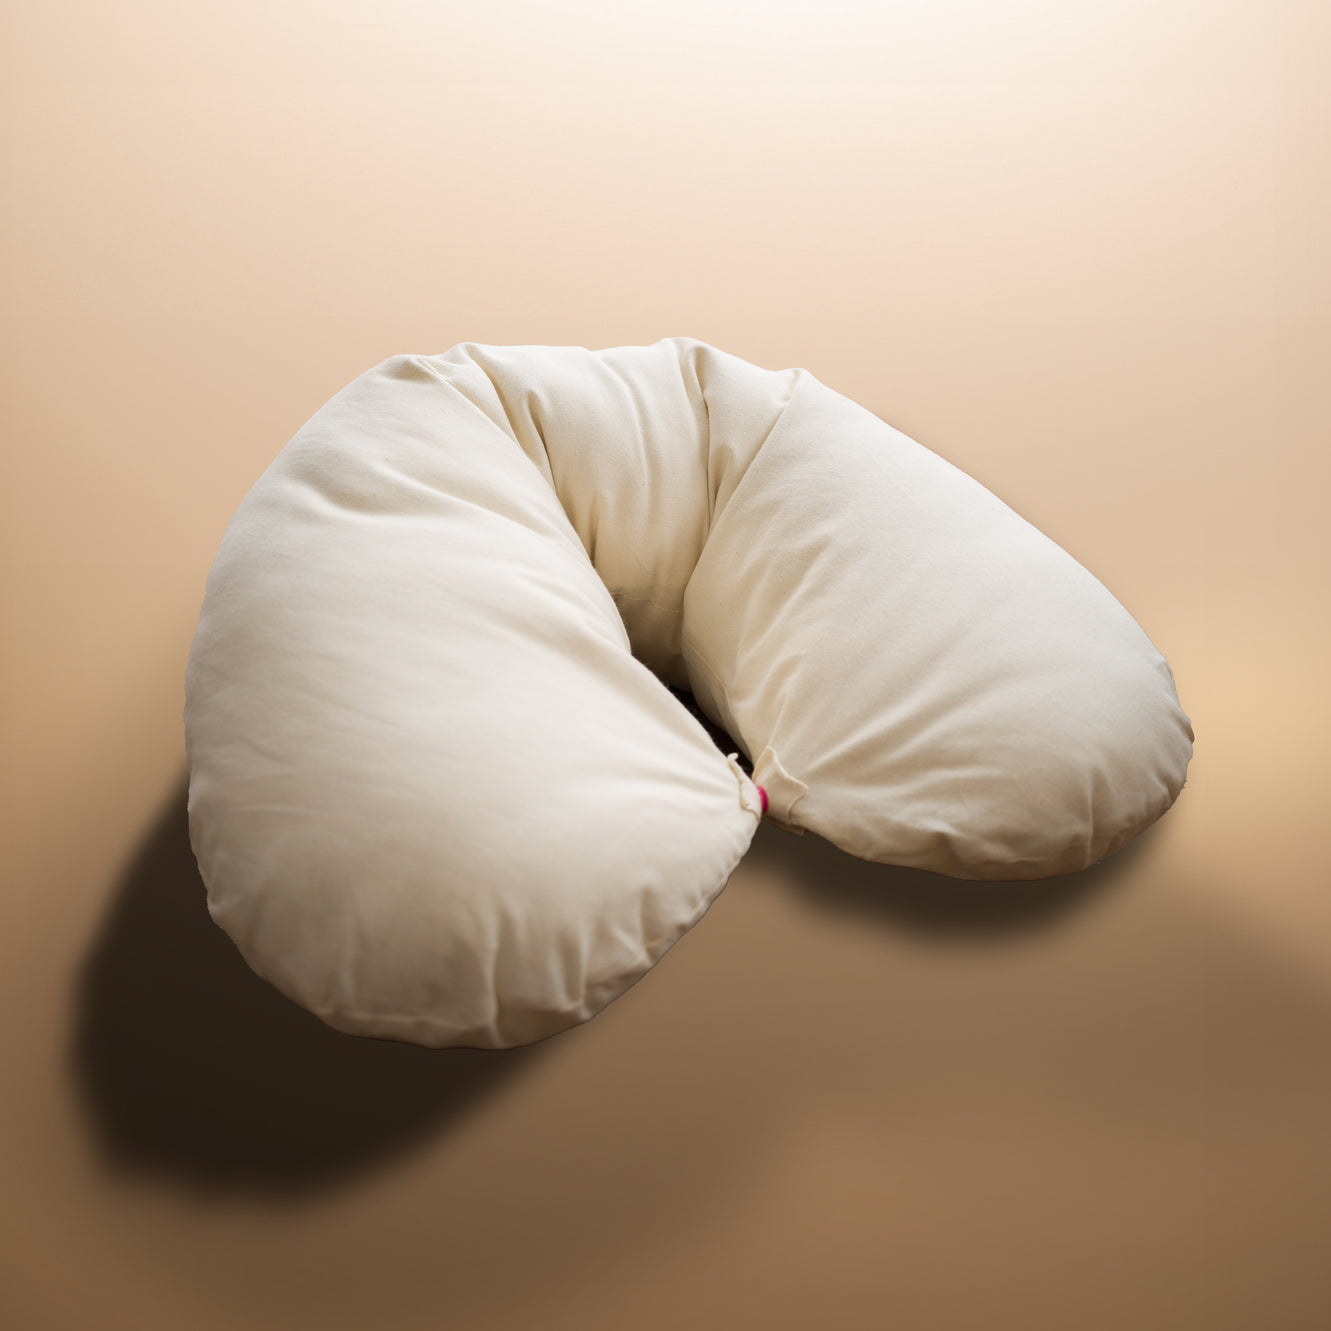 Easily adjust the shape of the puff pillow by connecting the two ends of the pillow to form a bubble shape